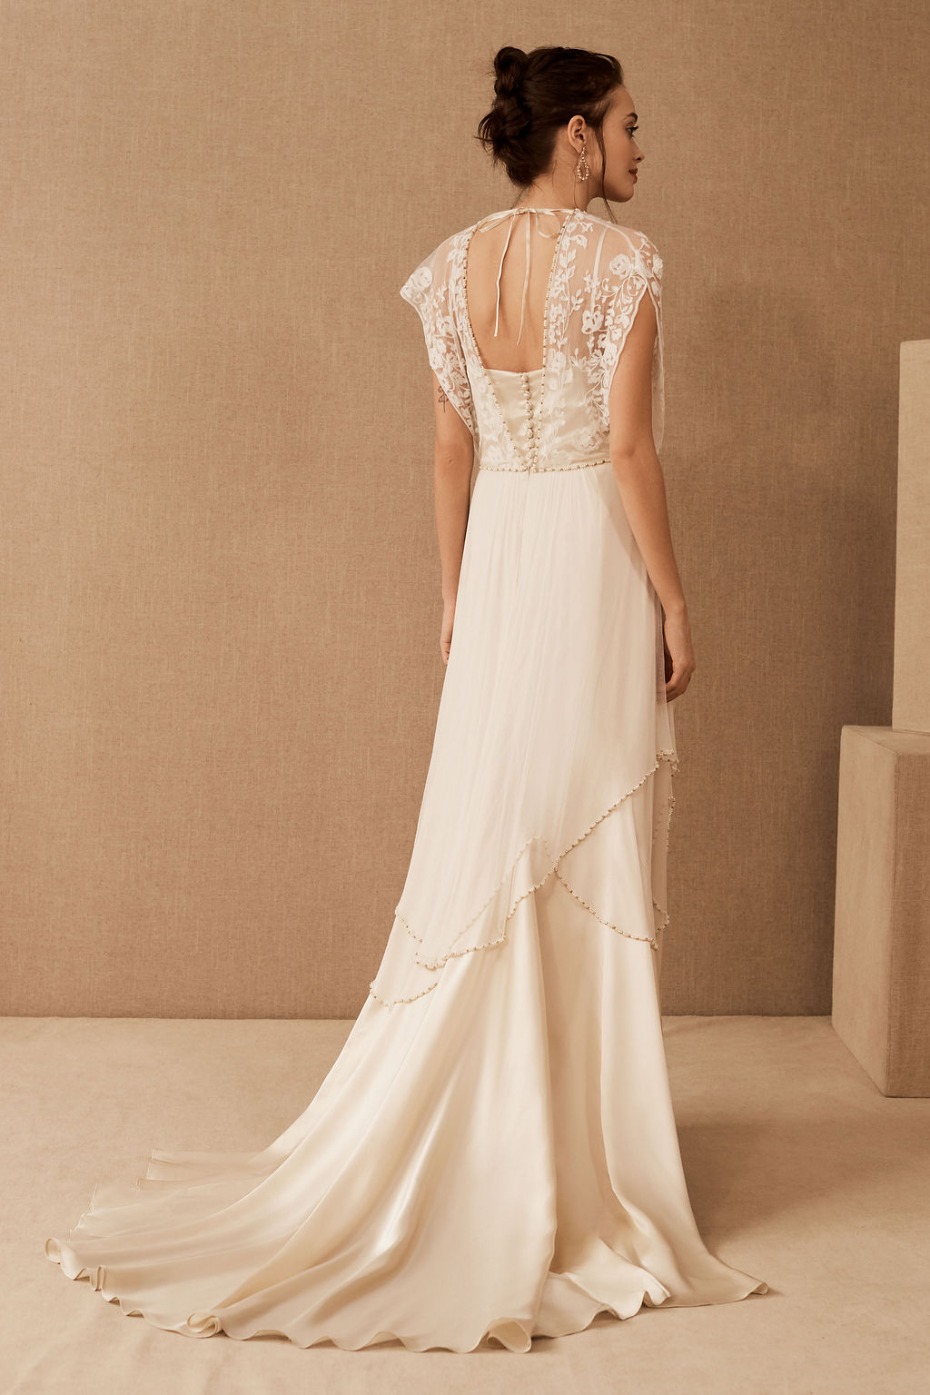 BHLDN Is Turning 10 on Valentine's Day and the Much-Loved Brand Is Giving US a Gift